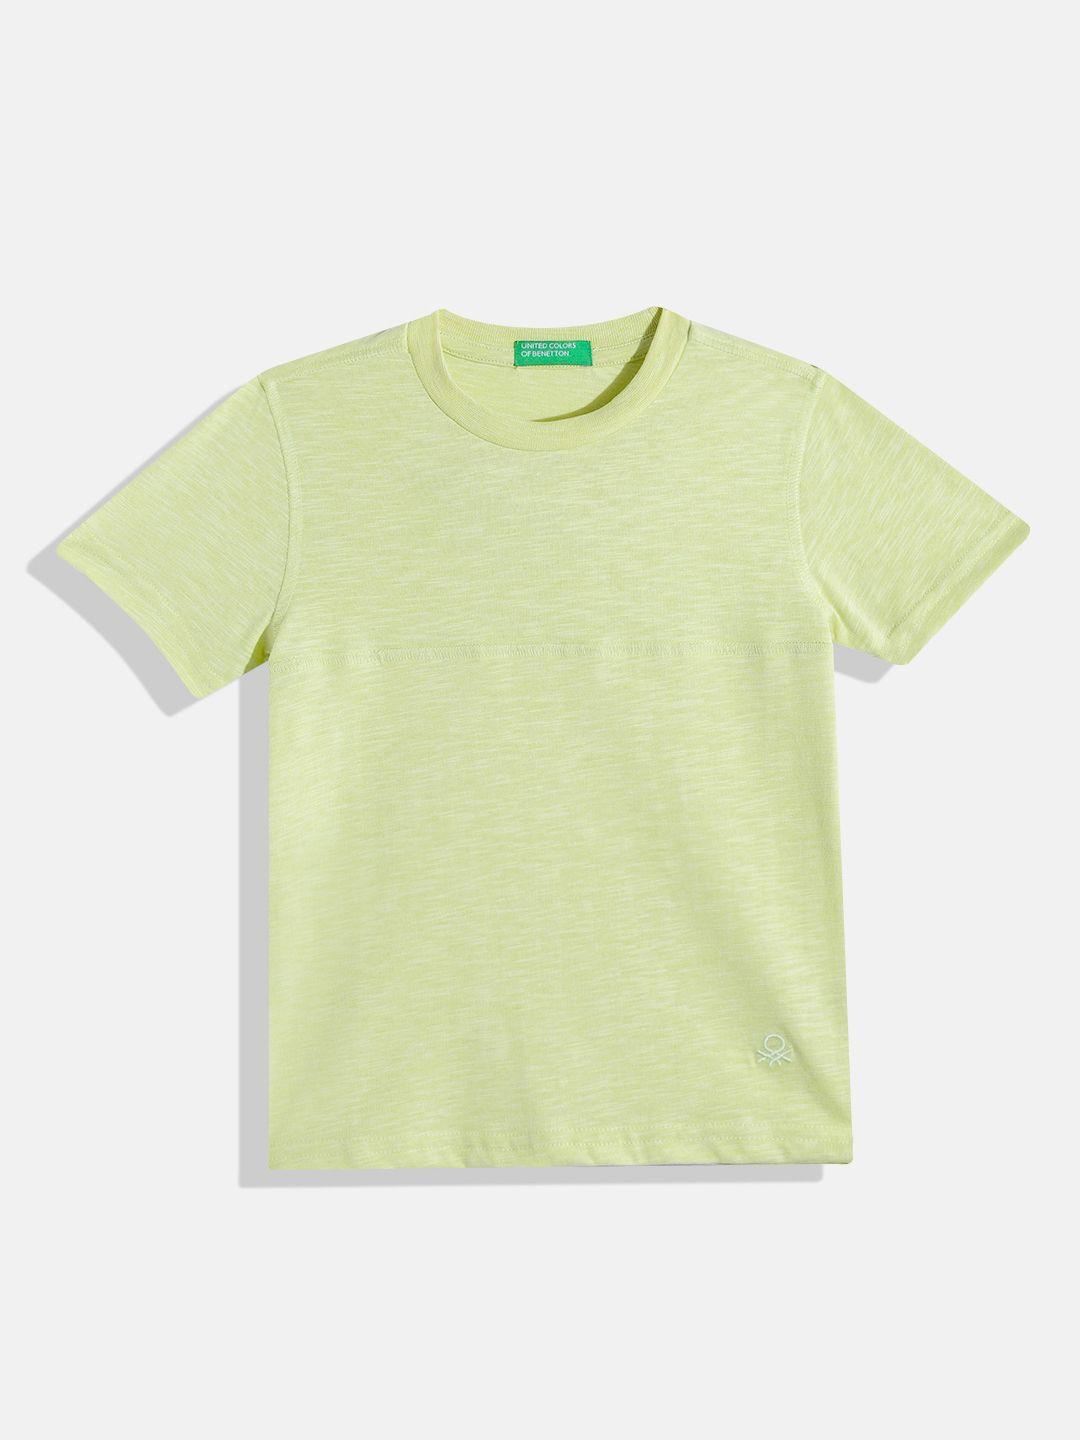 united colors of benetton boys solid t-shirt